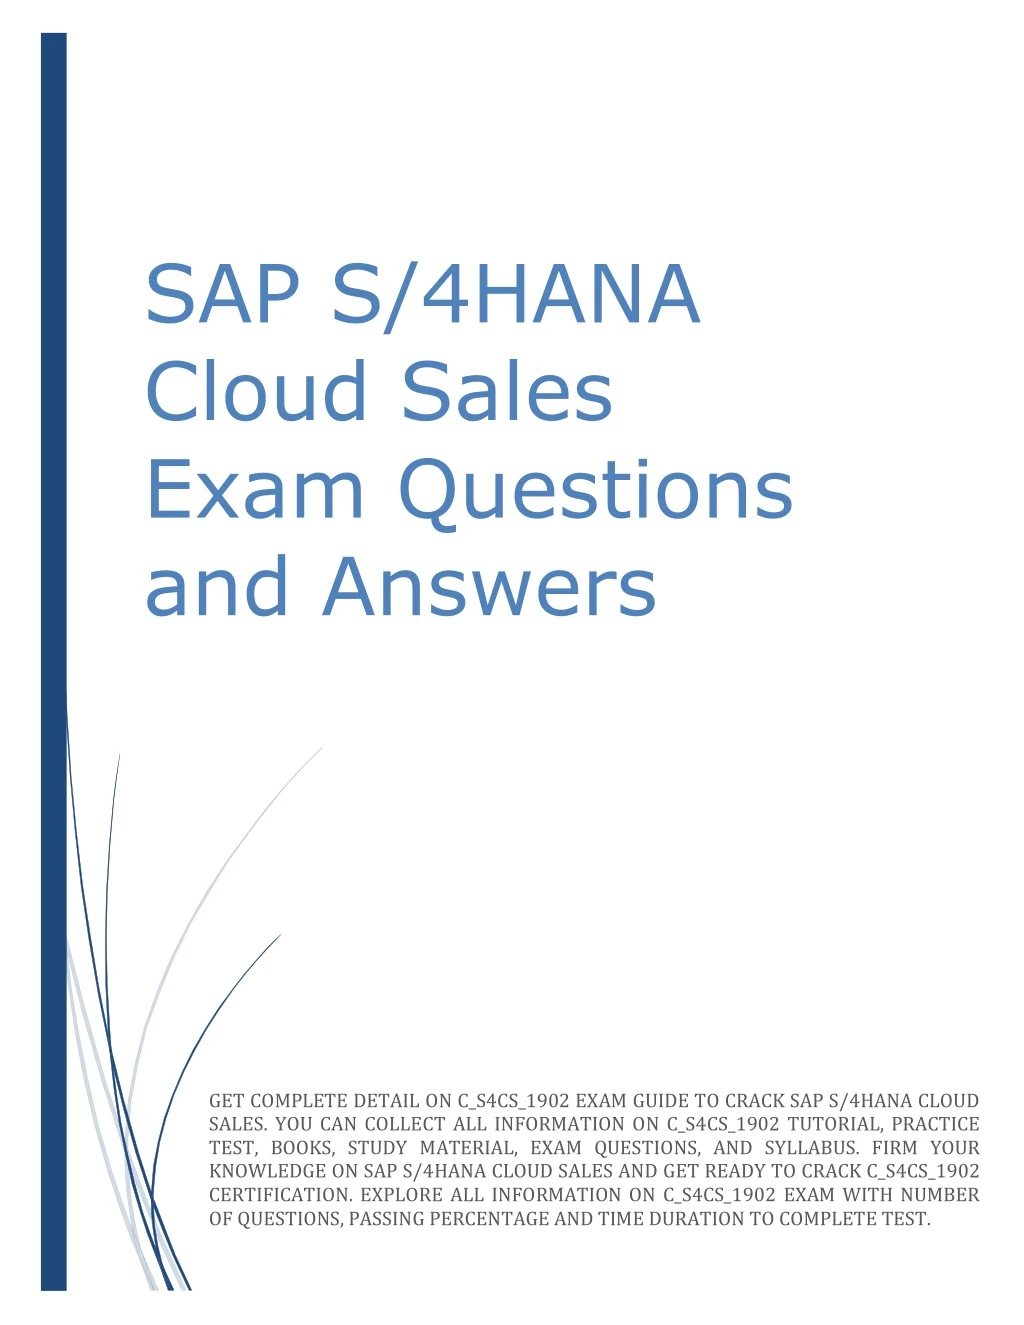 sap s 4hana cloud sales exam questions and answers